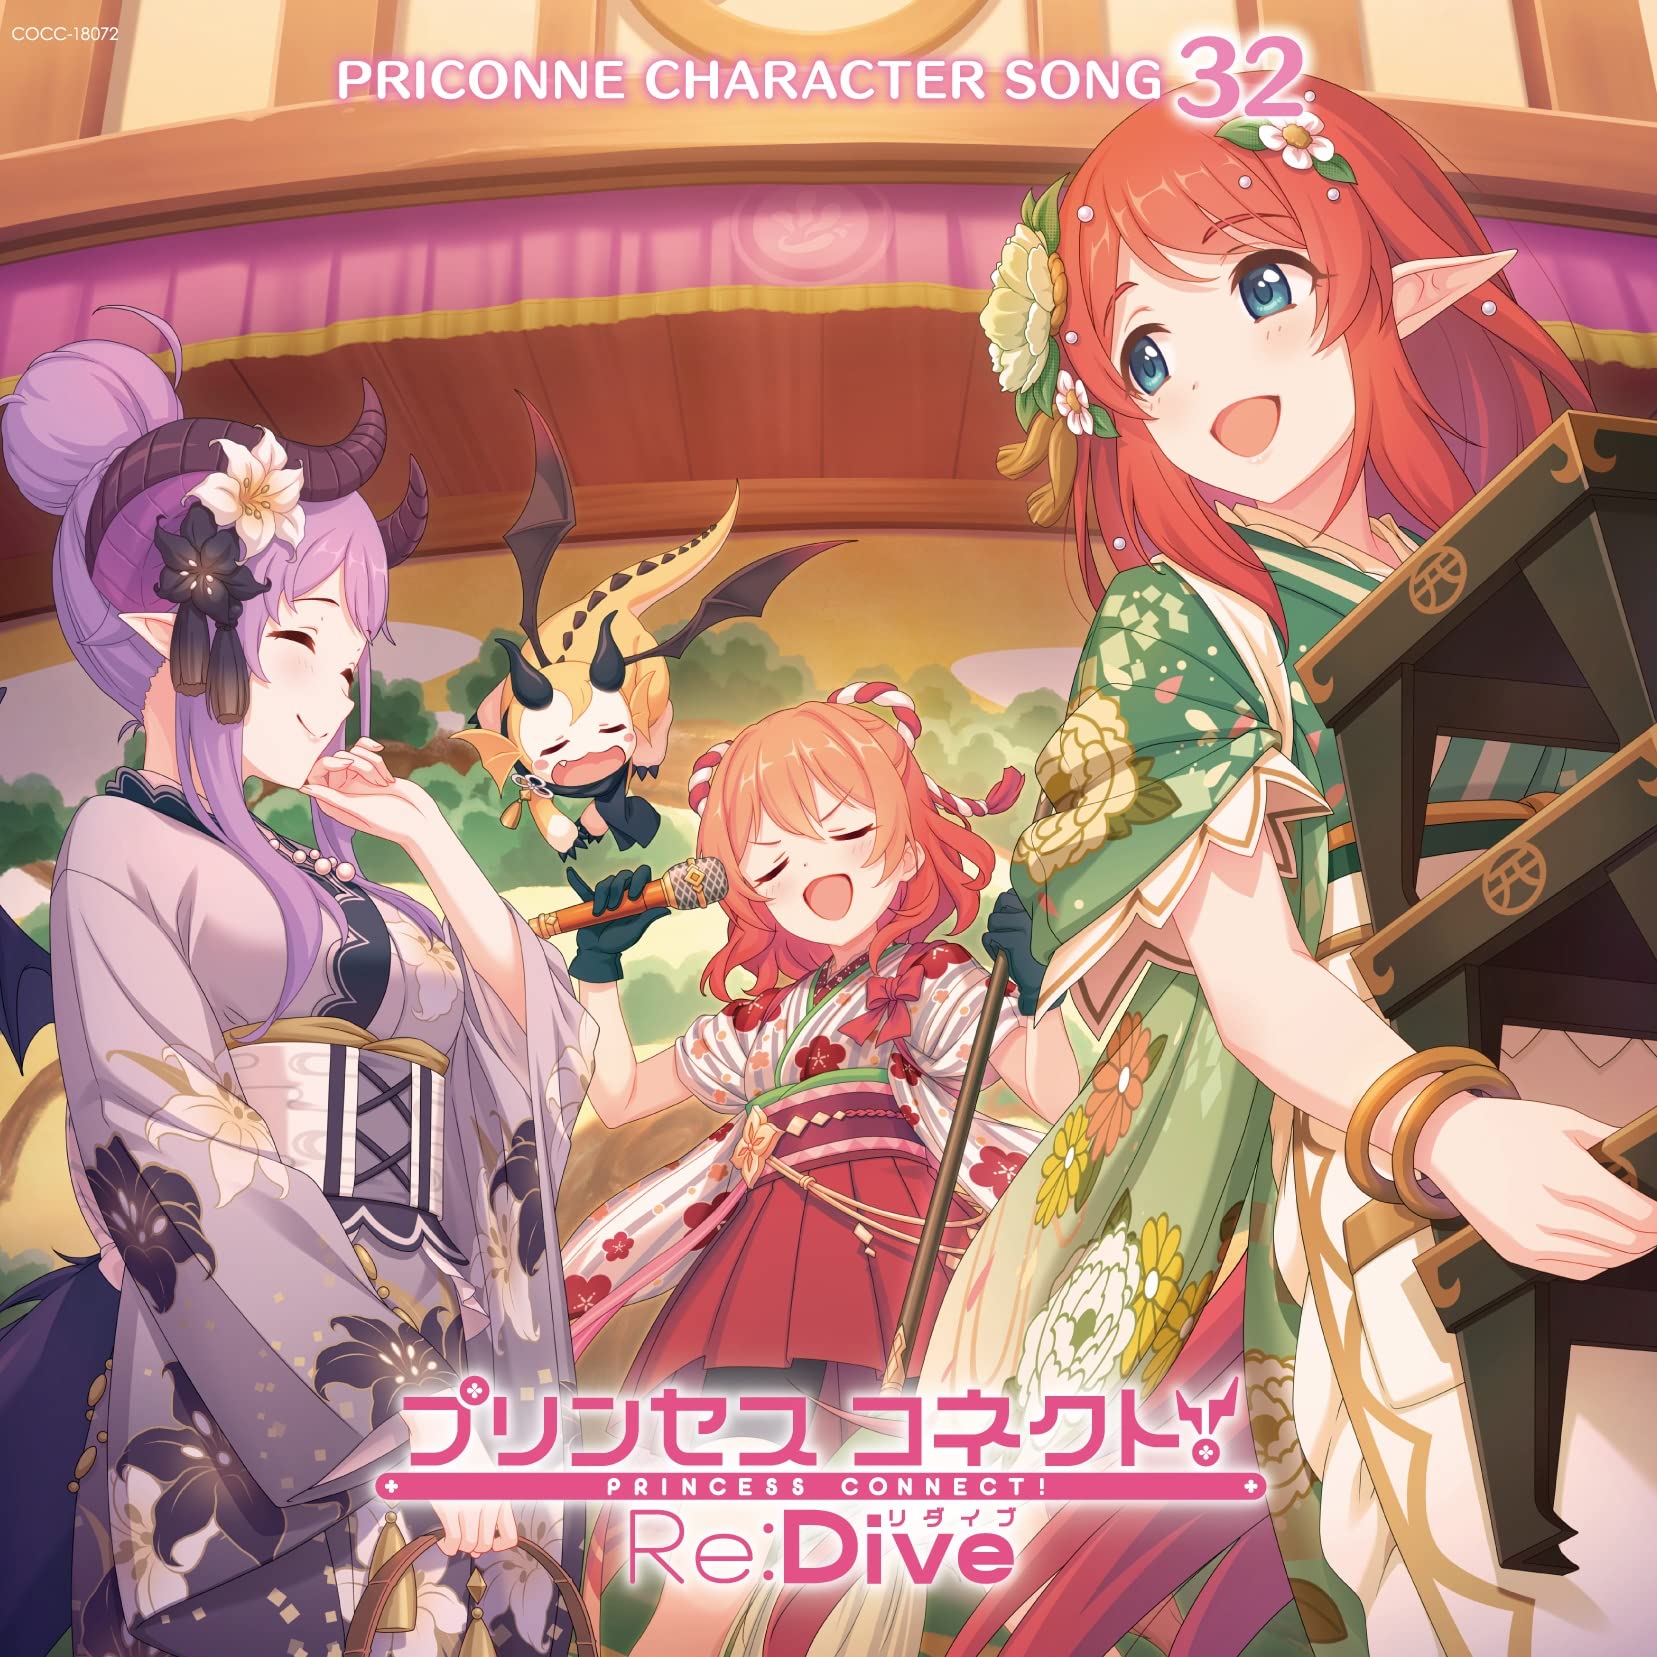 PRICONNE CHARACTER SONG 32.jpg